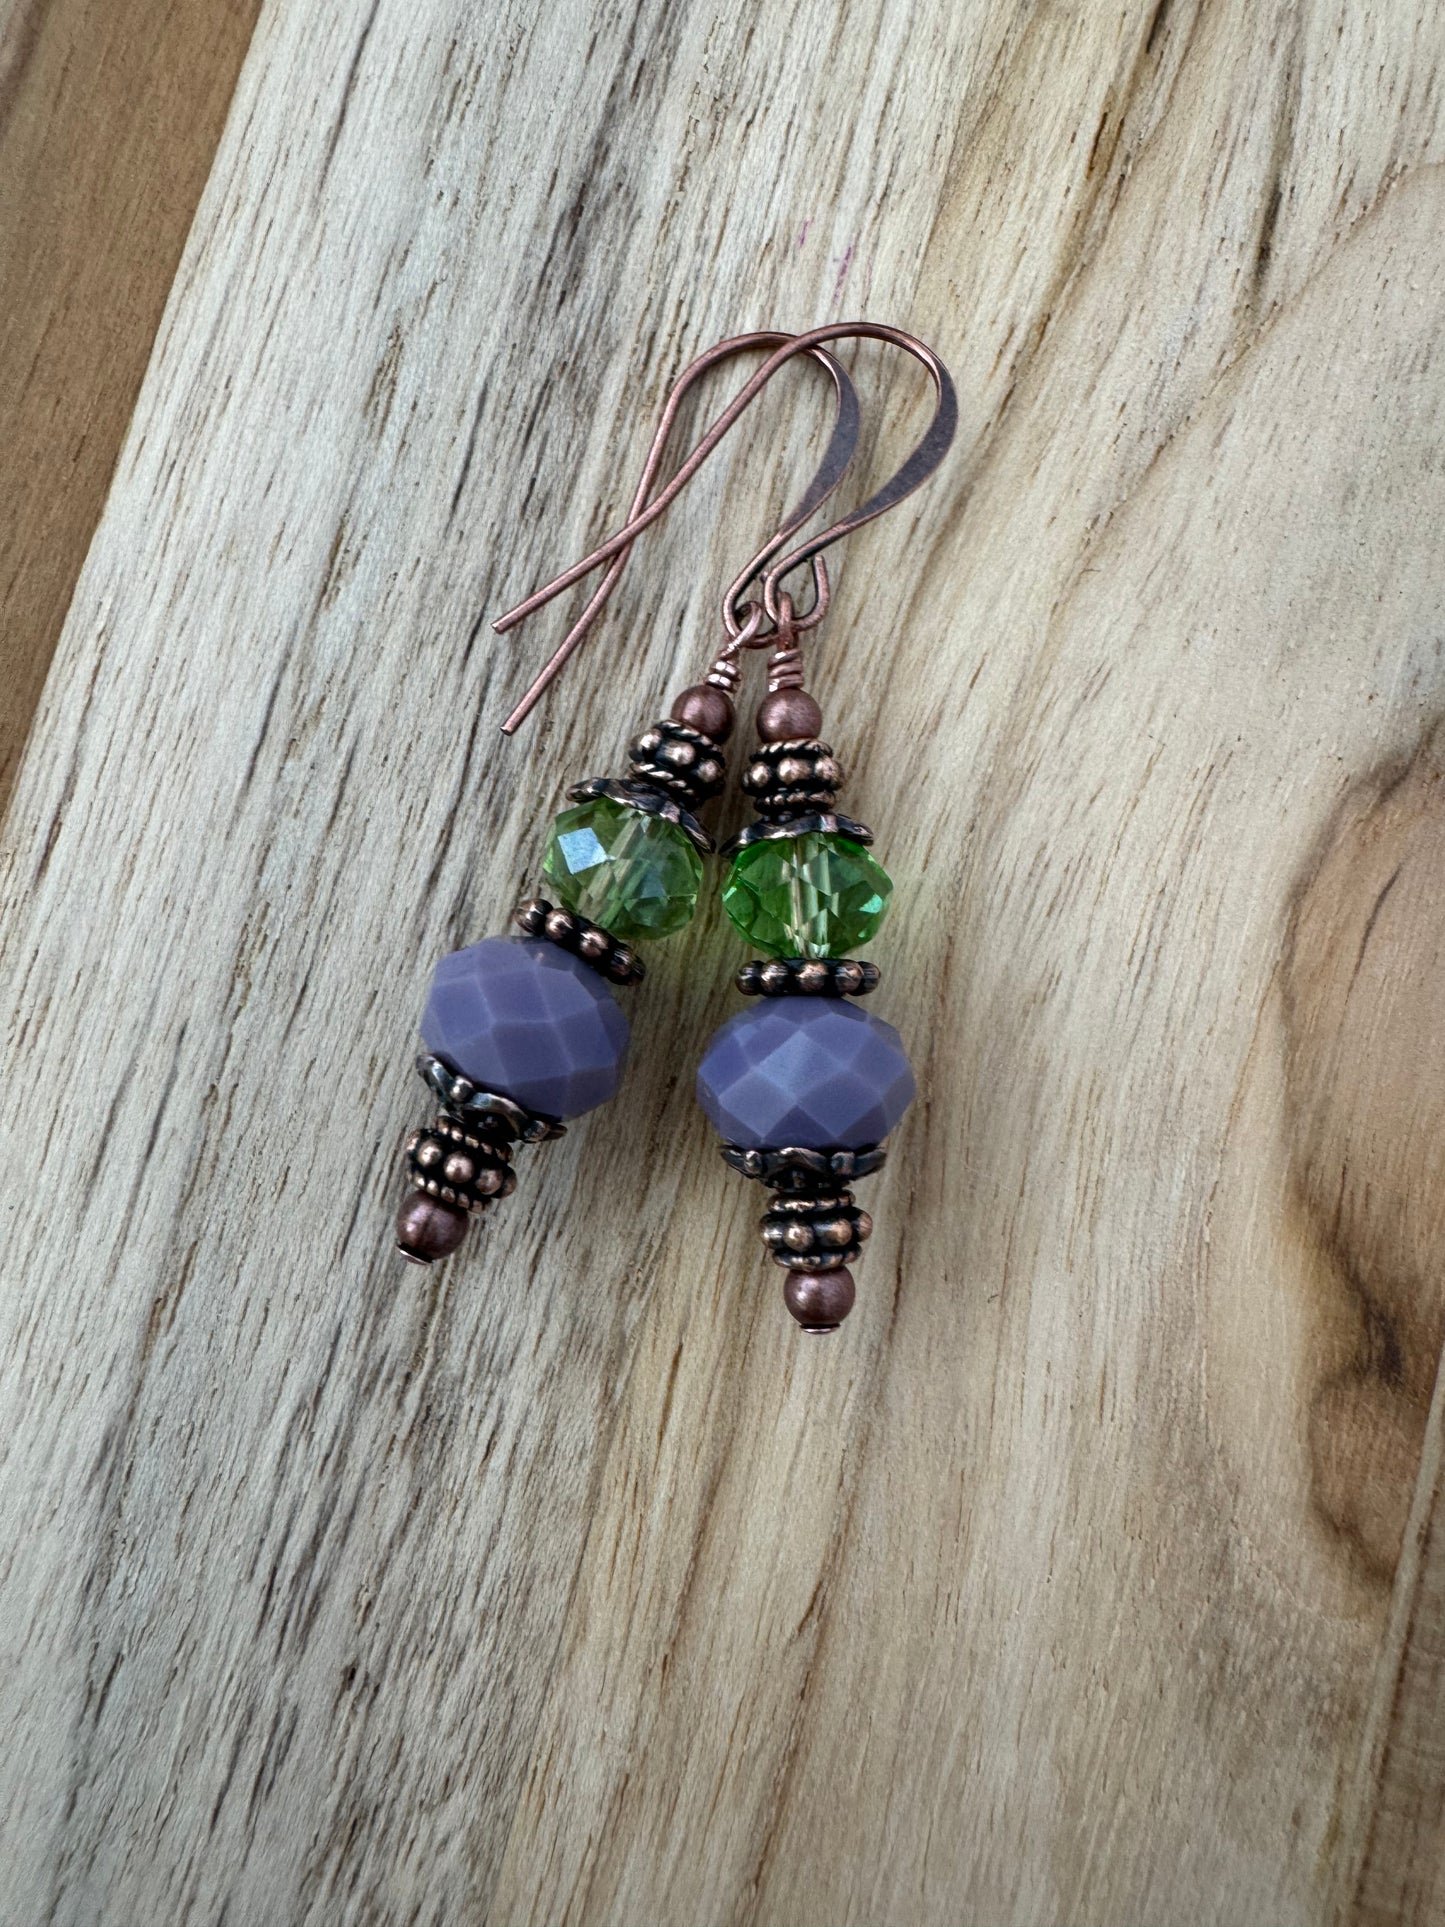 Vintage Vibe Purple and Green Crystal Dangle Earrings with Antique Copper Accent Beads